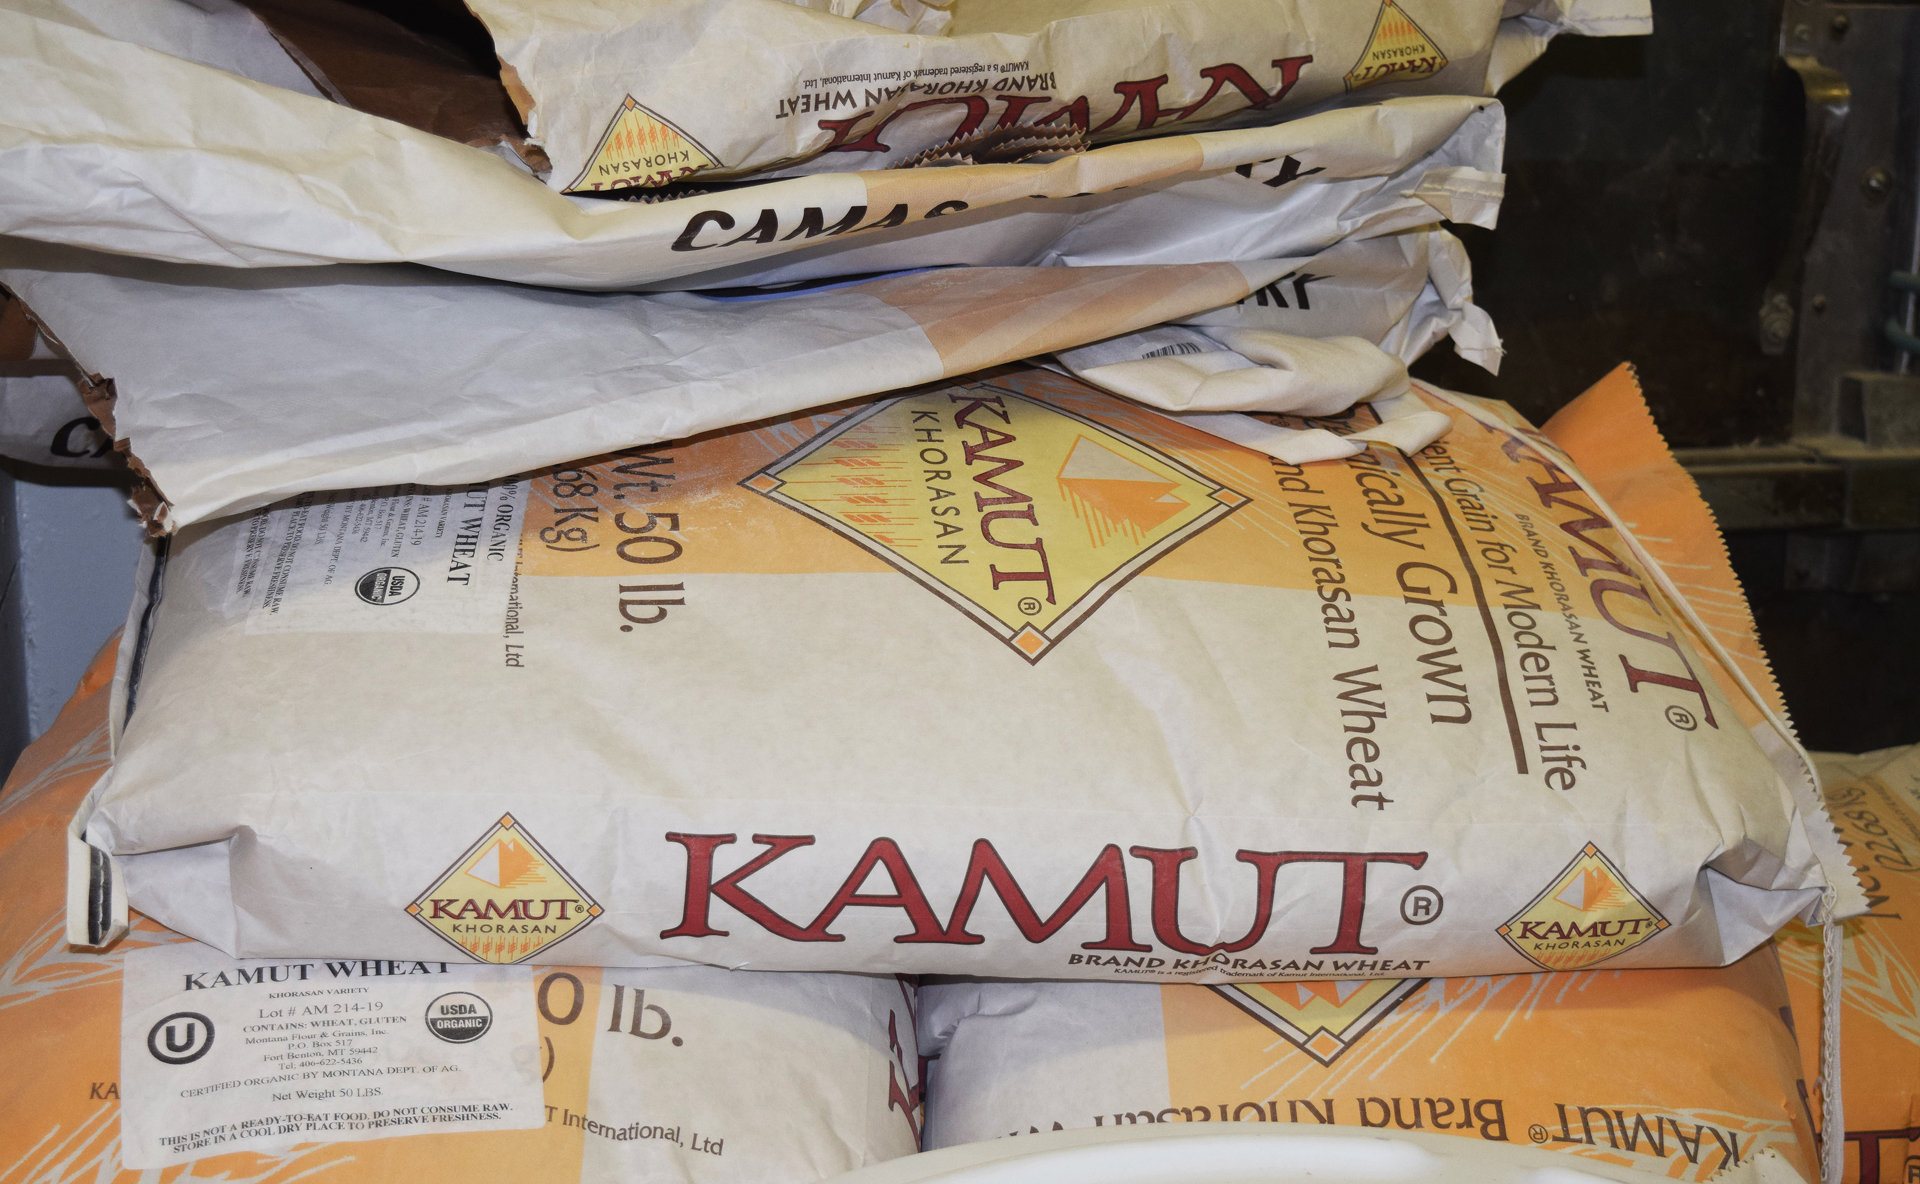 The kamut ground at the bakery is from khorasan, an ancient grain that predates modern durum wheat.